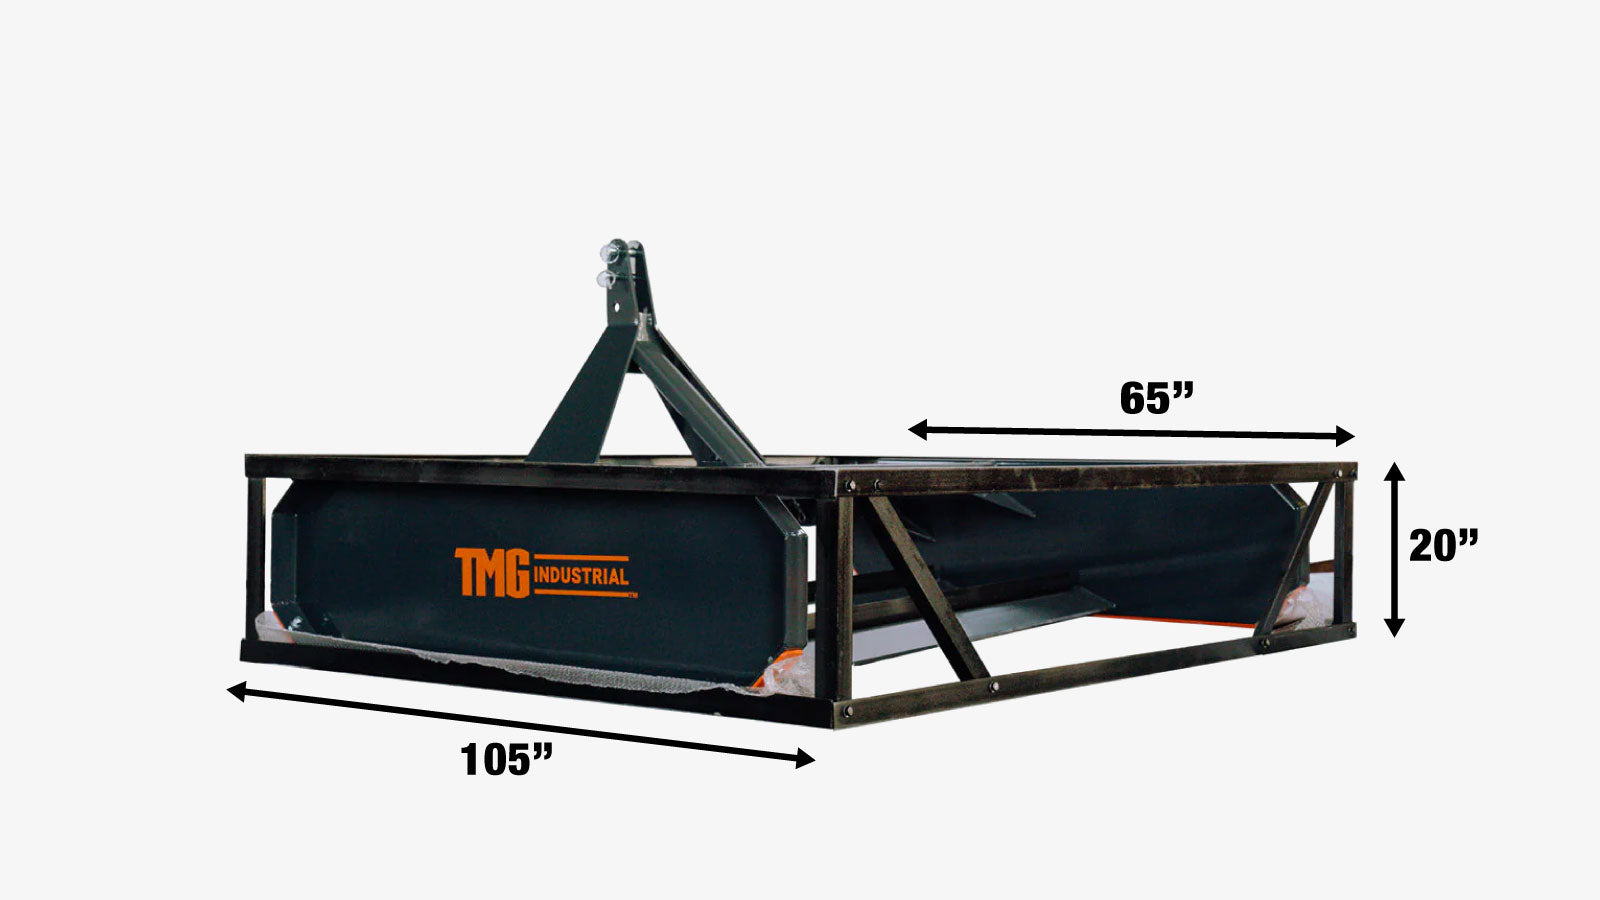 TMG Industrial 96” Tractor Land Leveler, 3-Point Hitch, 94” Grading Width, Adjustable Depth, Double Edge Blades, Category 1 & 2, TMG-TLL96-shipping-info-image